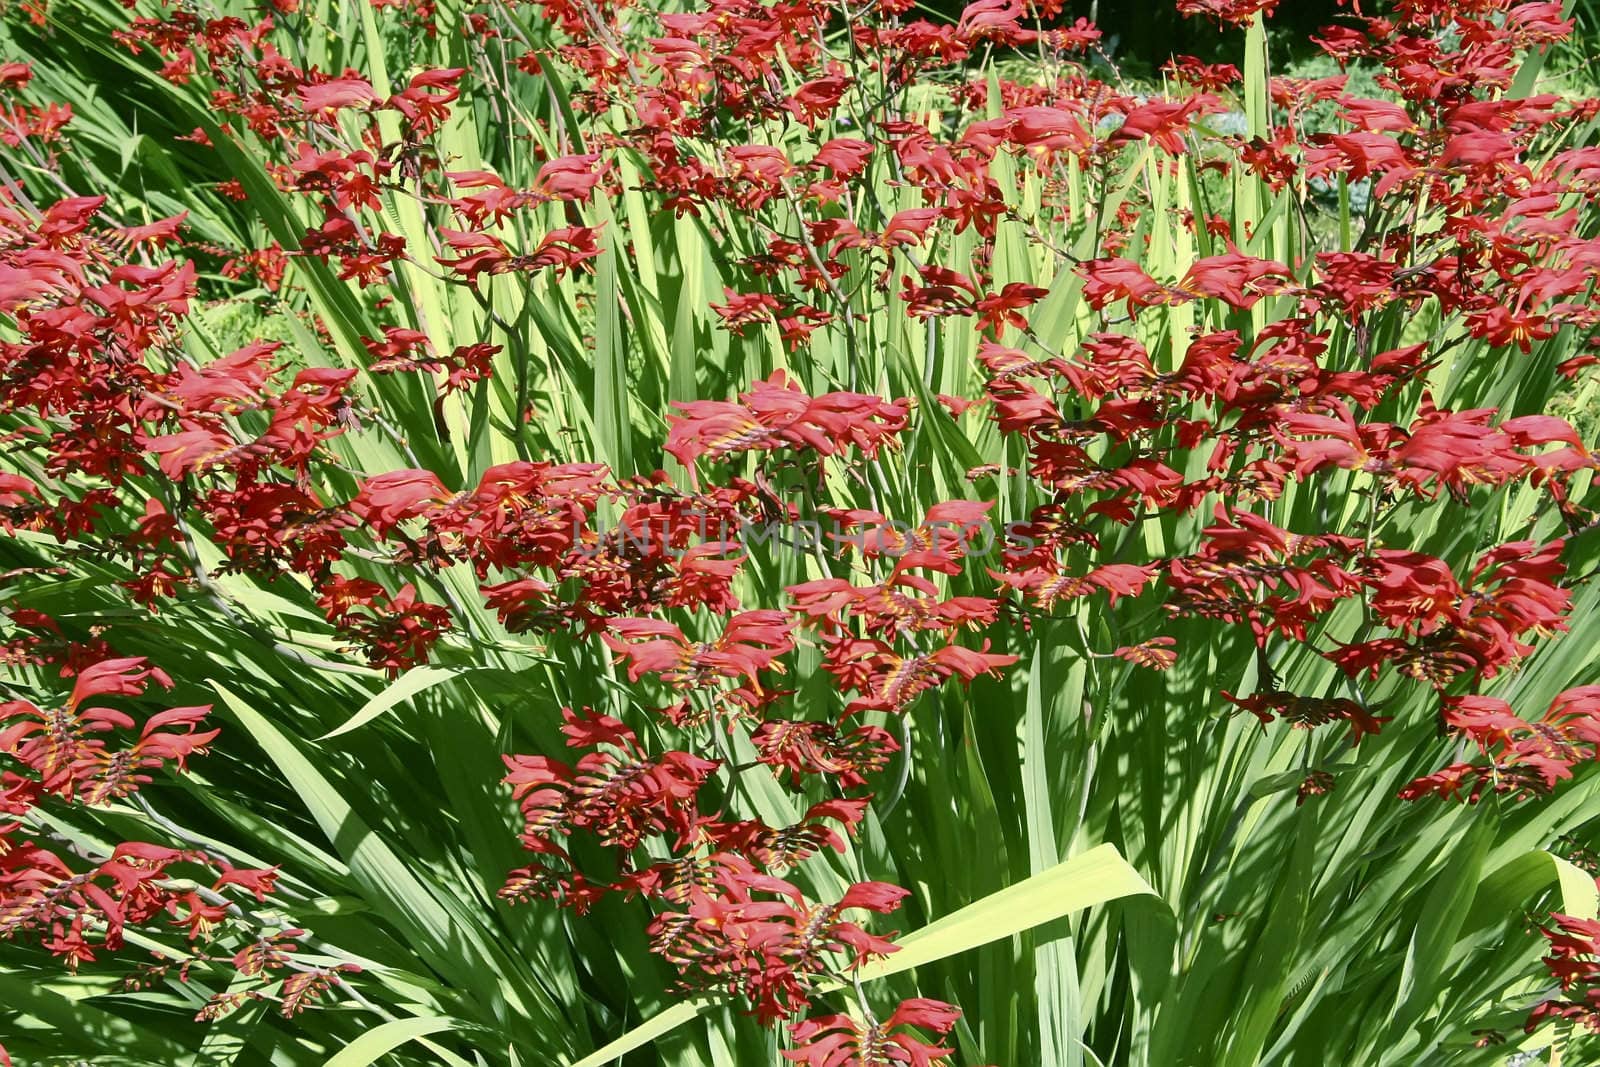 A shot of the crocosmia plant.  The flowers look as if they are in flight above the green foliage
